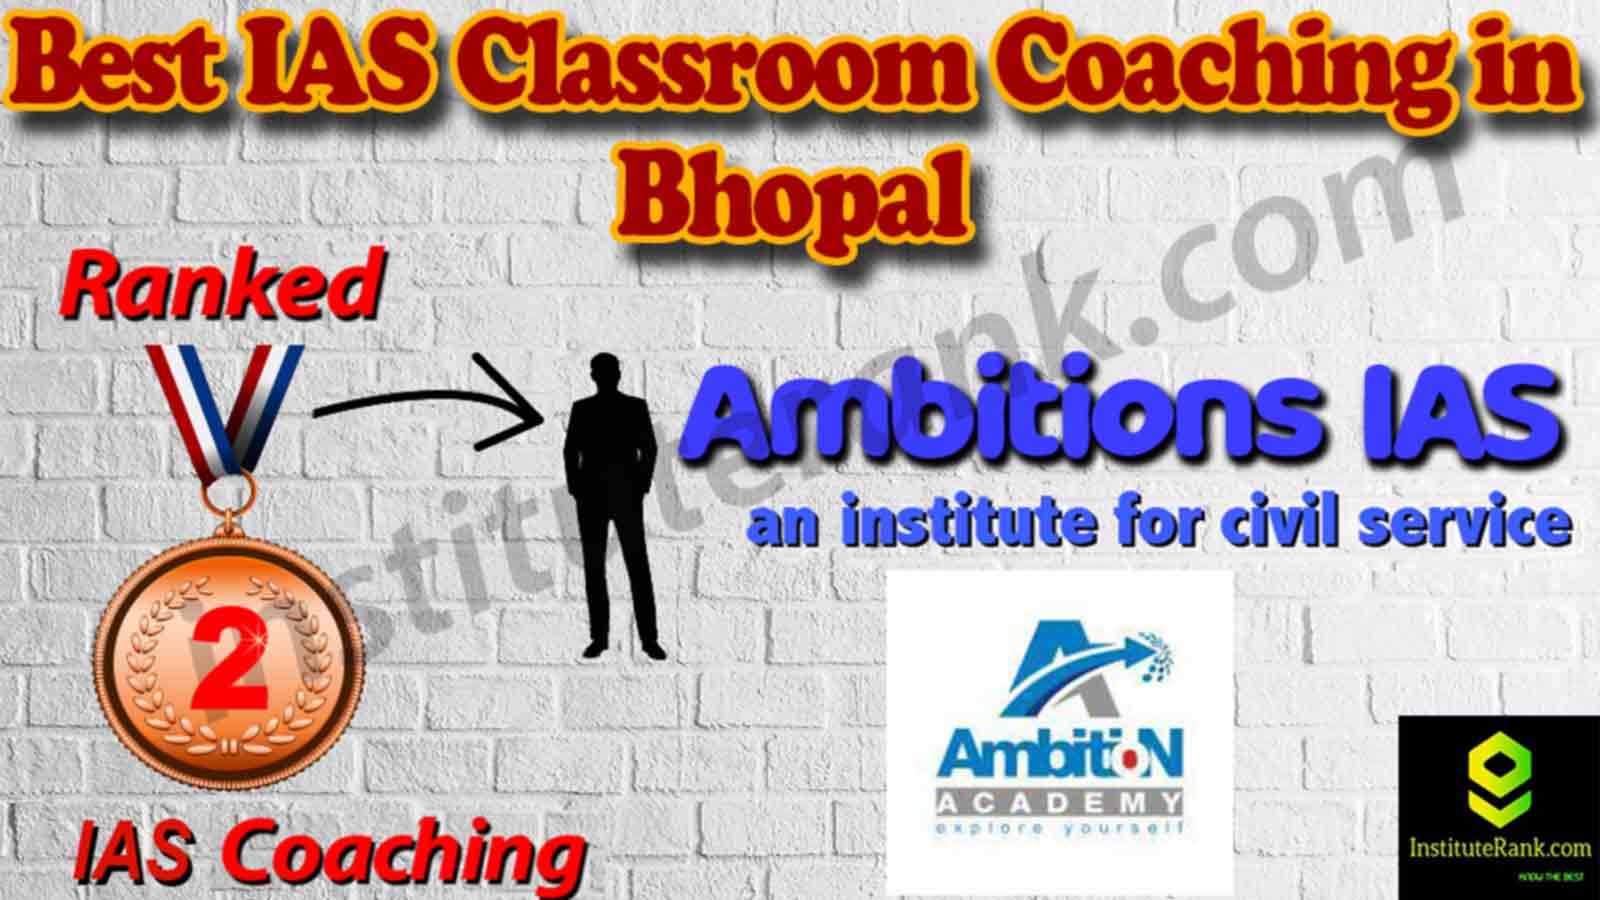 Best IAS Coaching Institute and fees in Bhopal